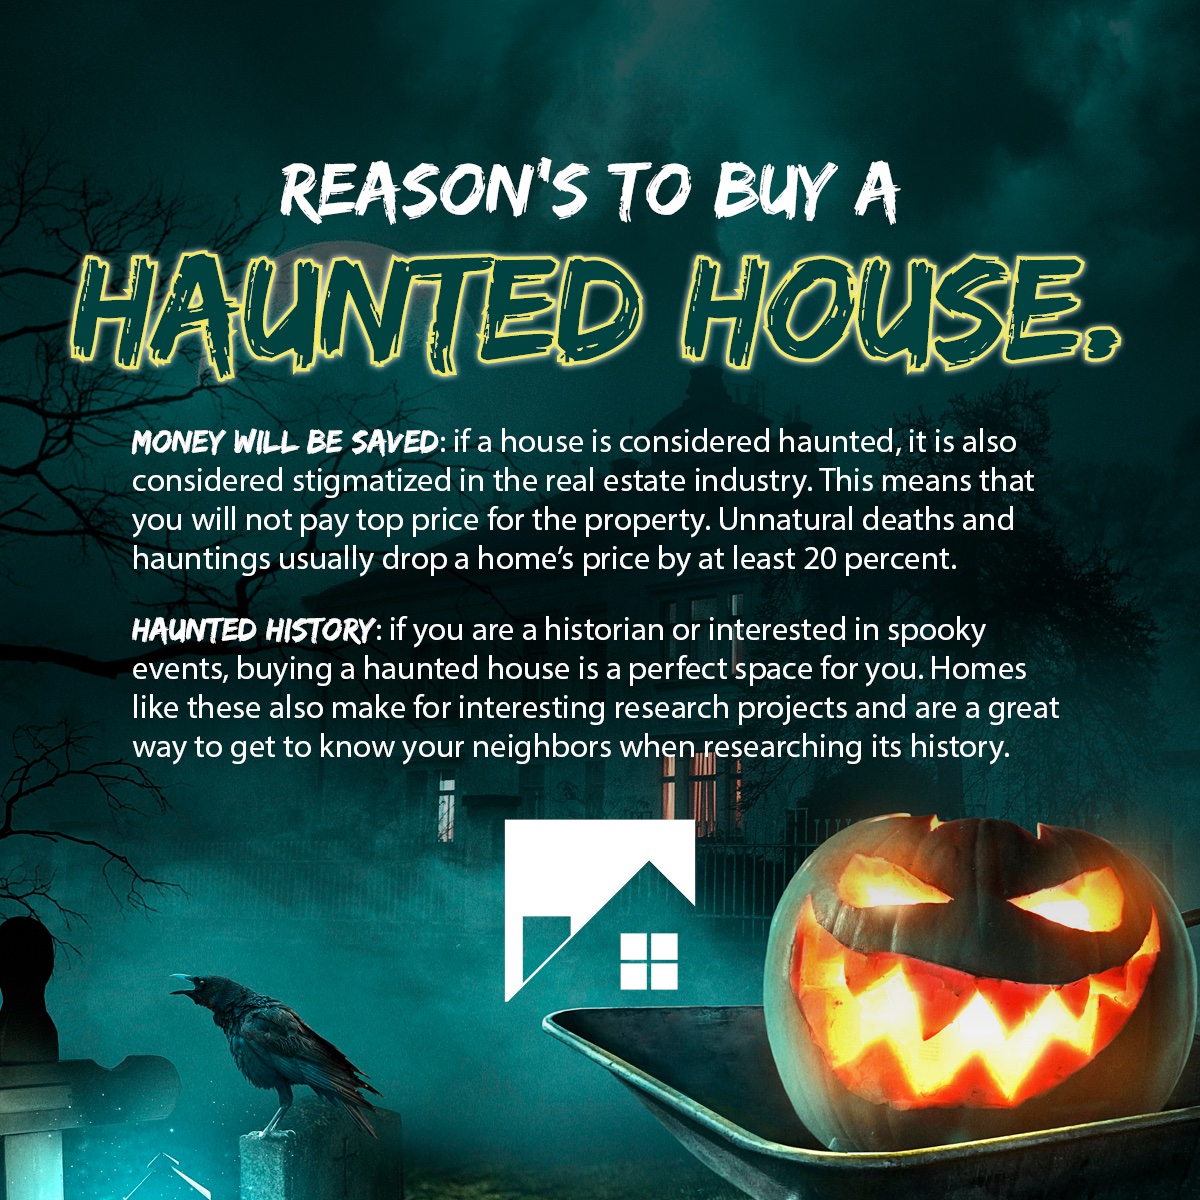 Why Buying a Haunted House Is a Good Investment